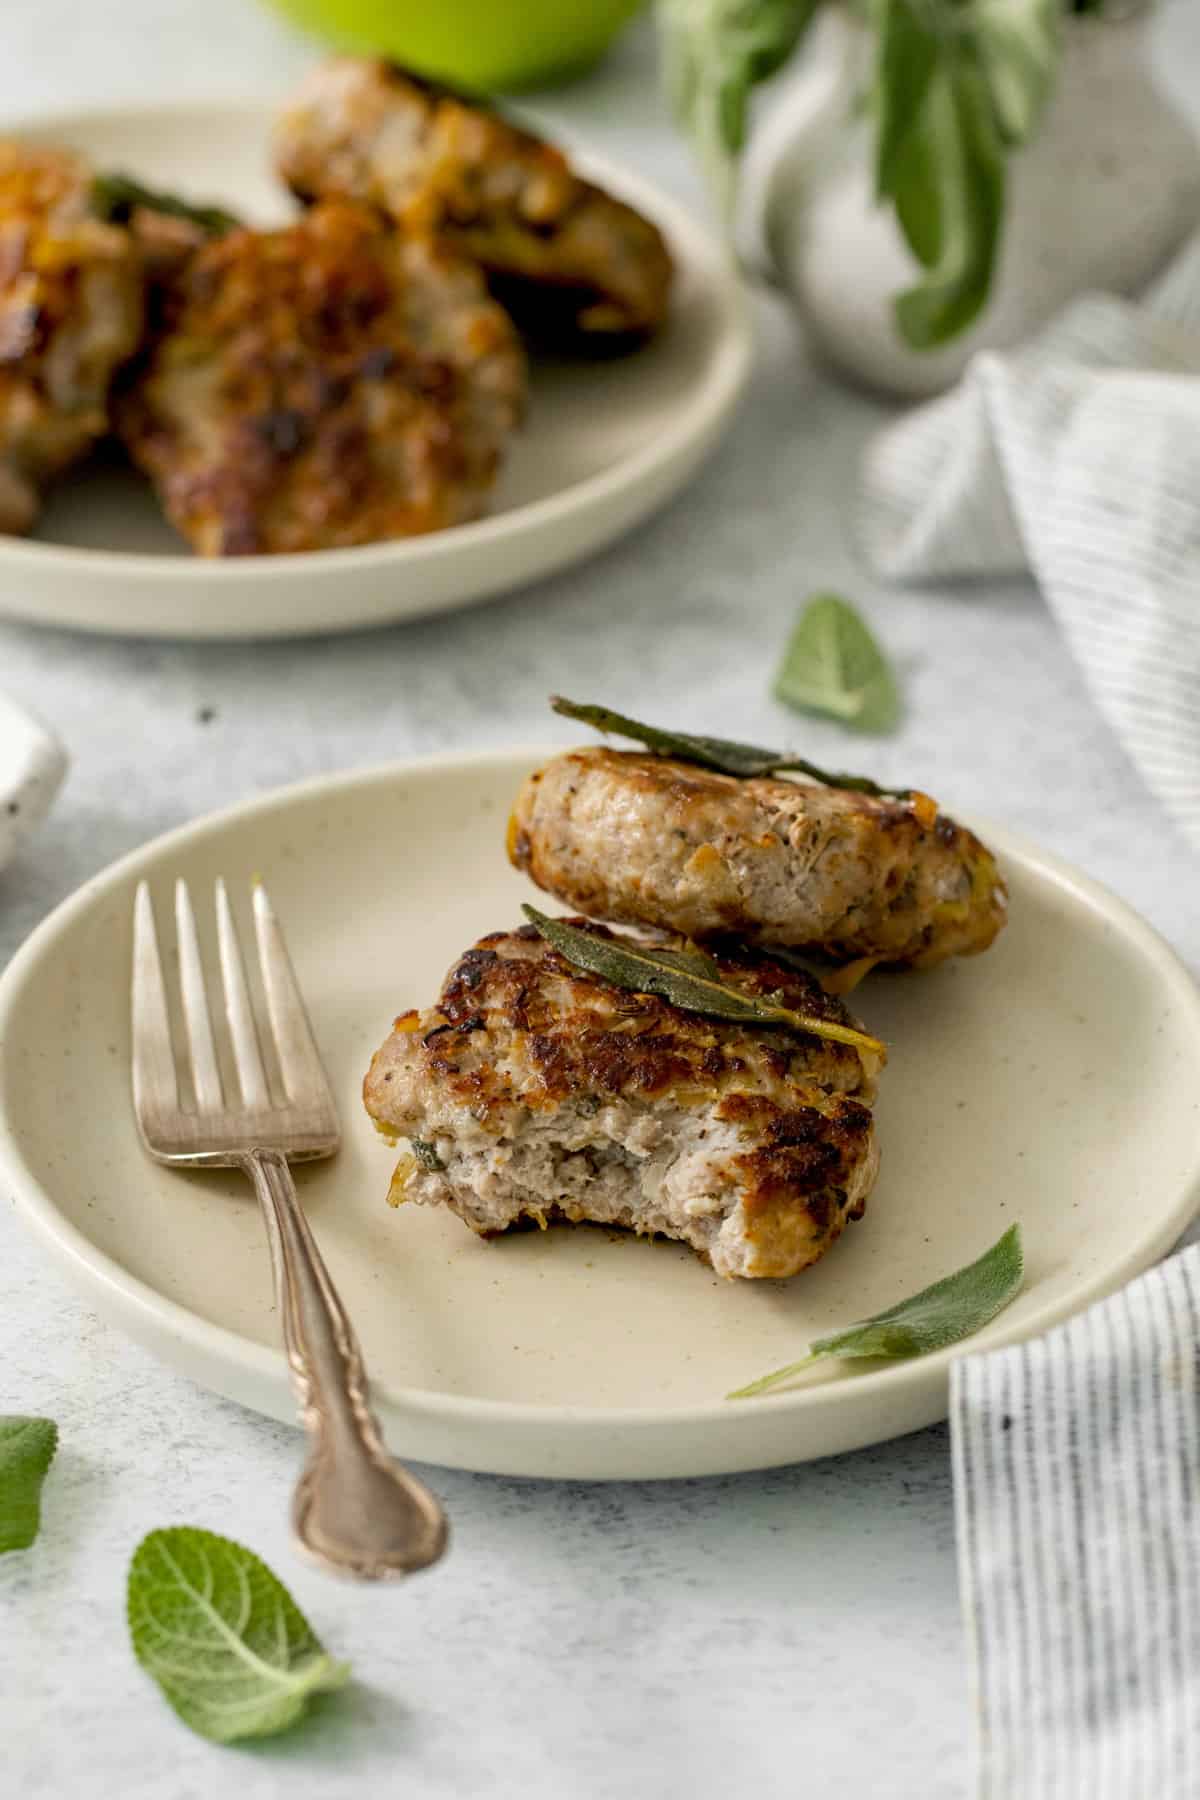 two breakfast sausage patties on a plate, one with a bite taken out.